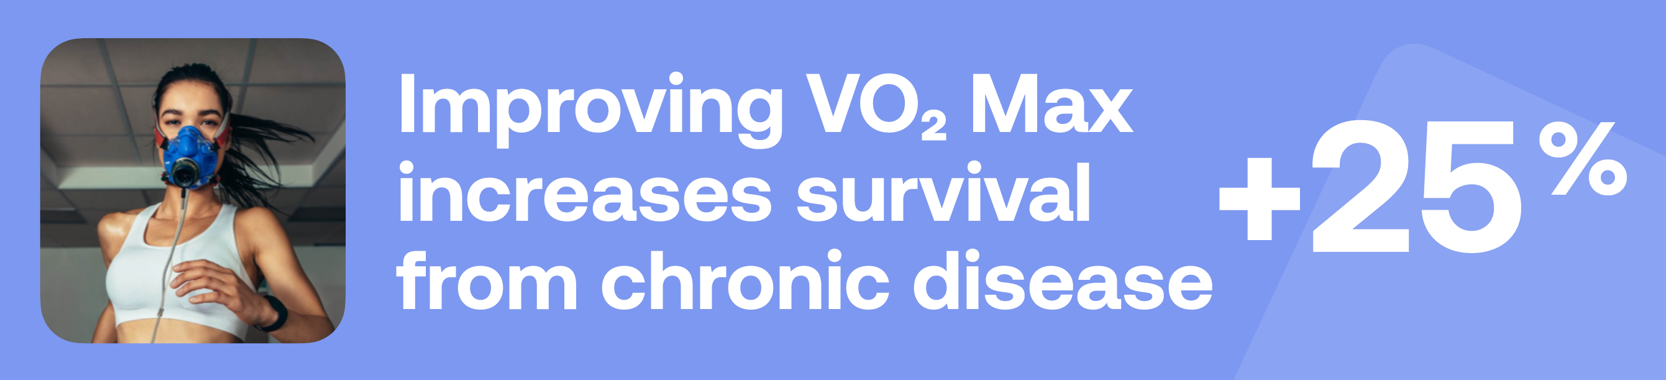 Improving VO₂ Max increases survival from chronic disease + 25%